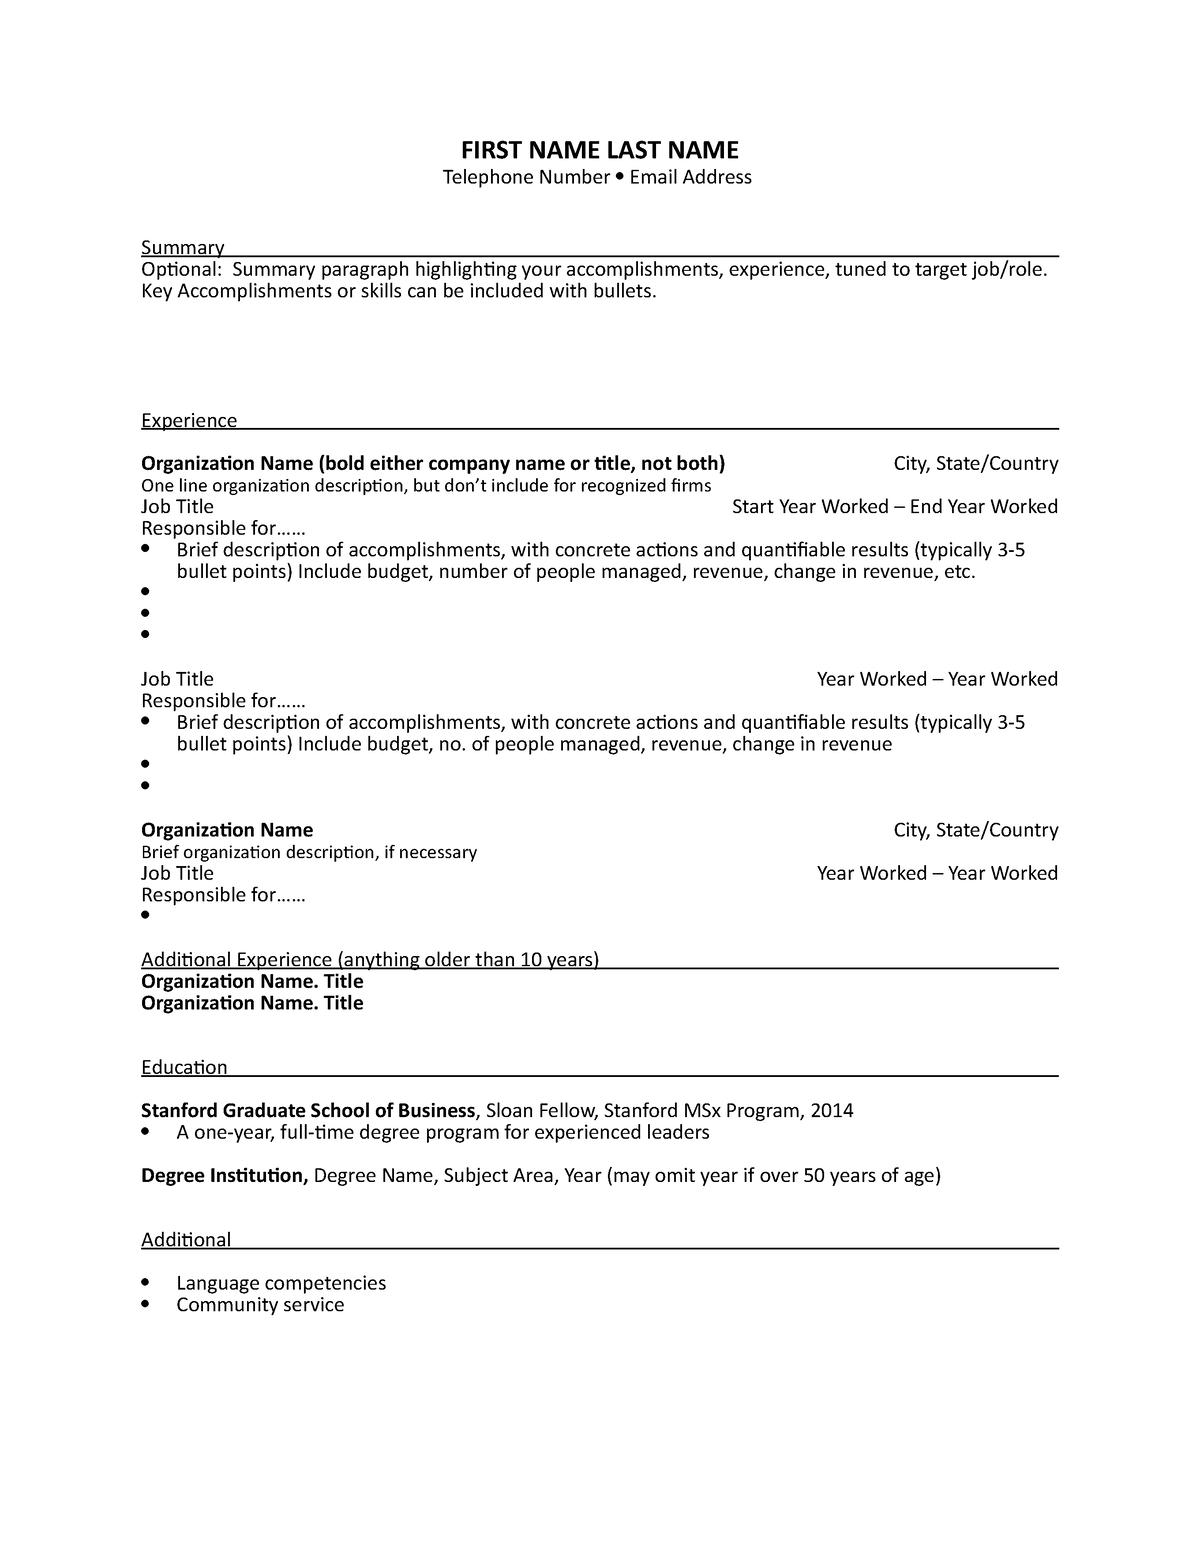 Stanford Resume Template FIRST NAME LAST NAME Telephone Number Email